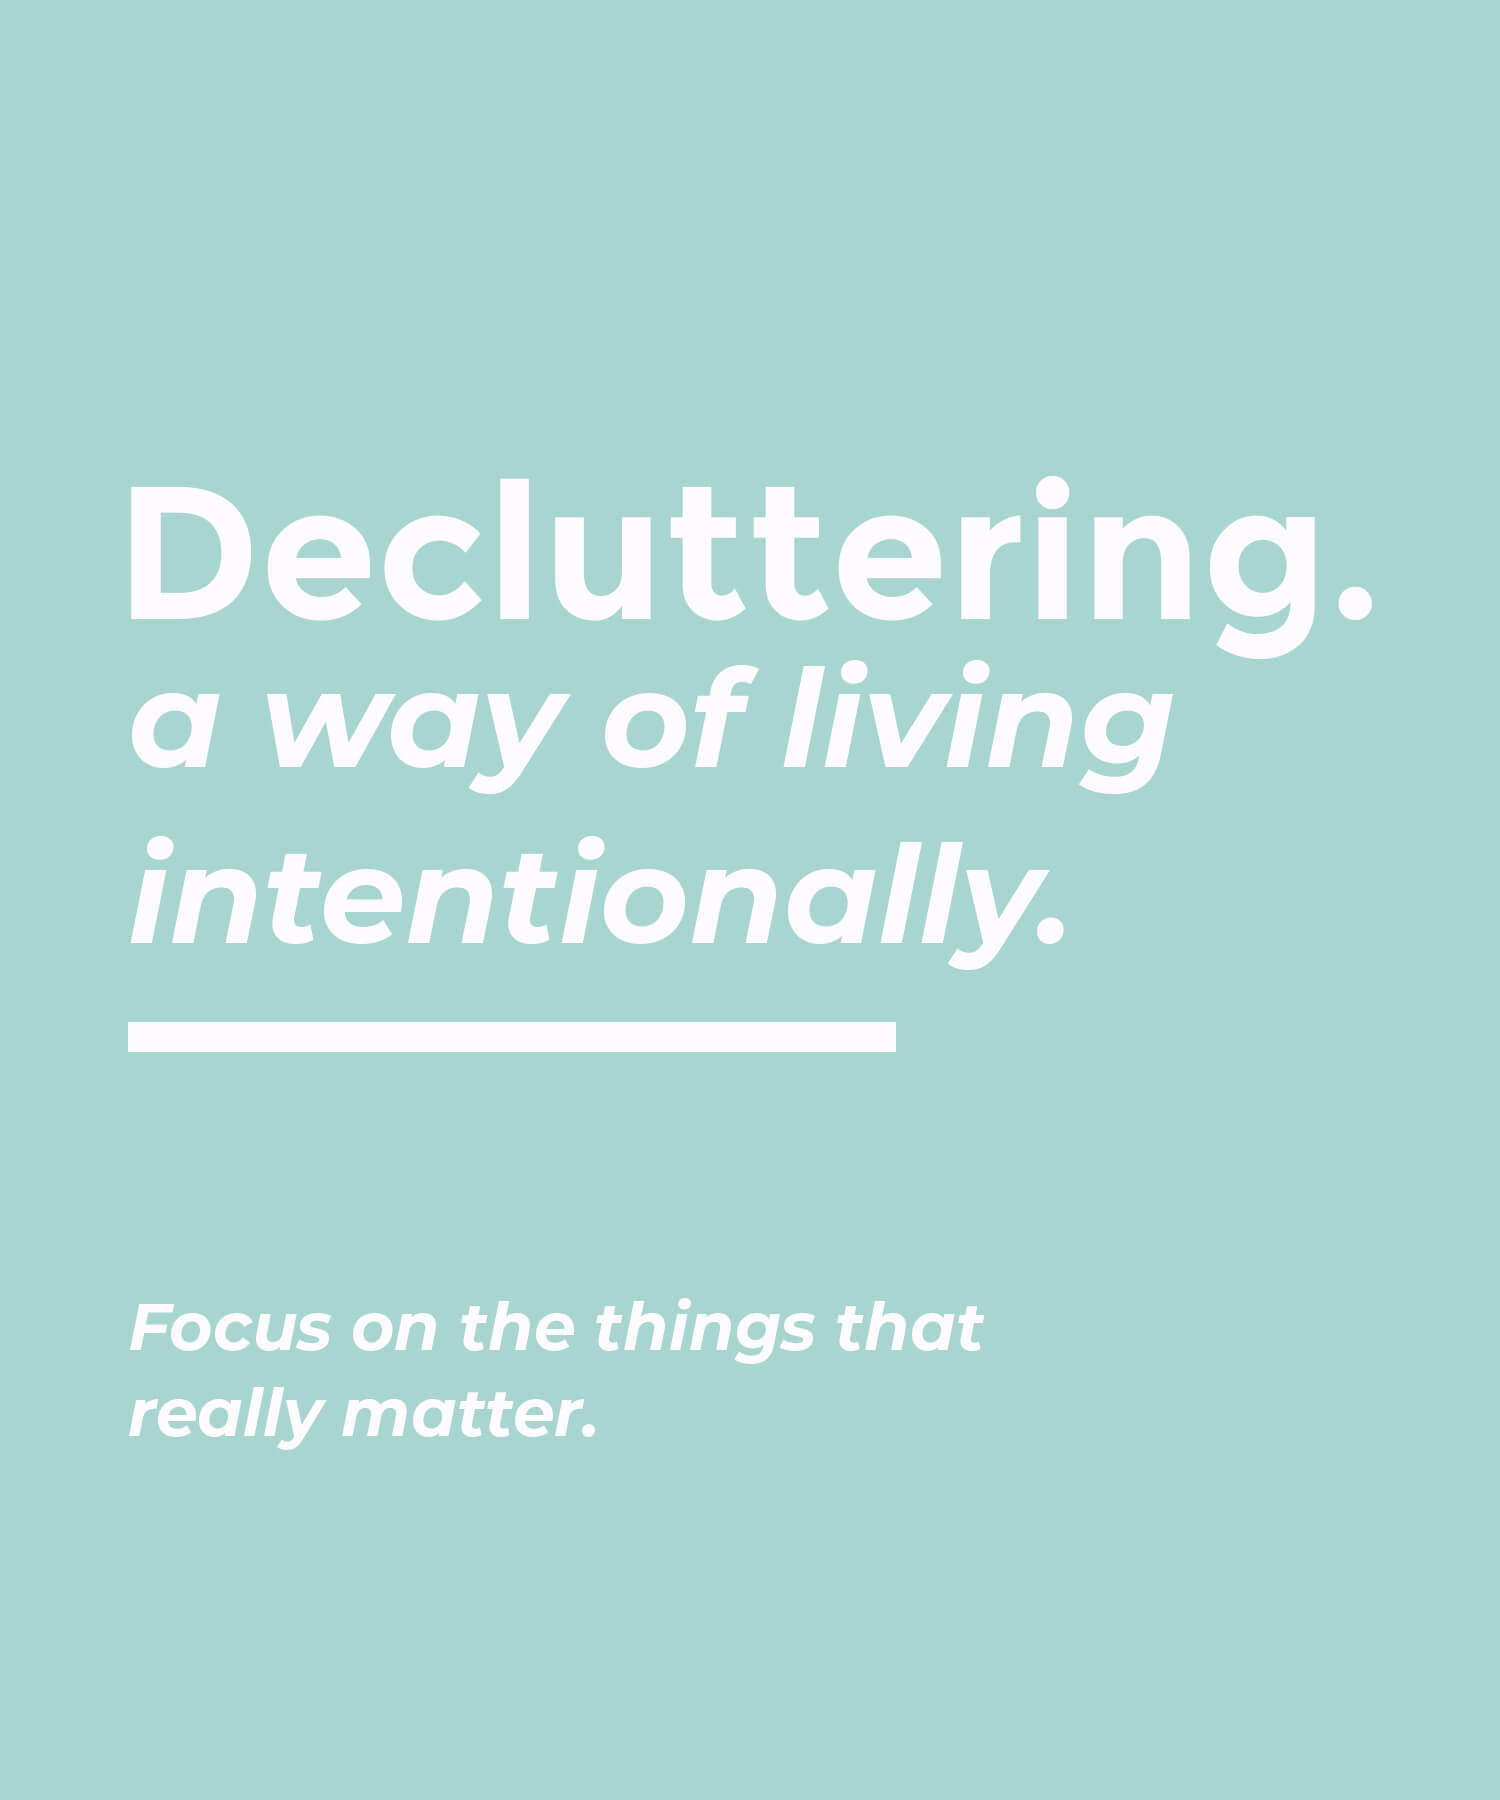 Declutter your thoughts. Focus on what matters most.